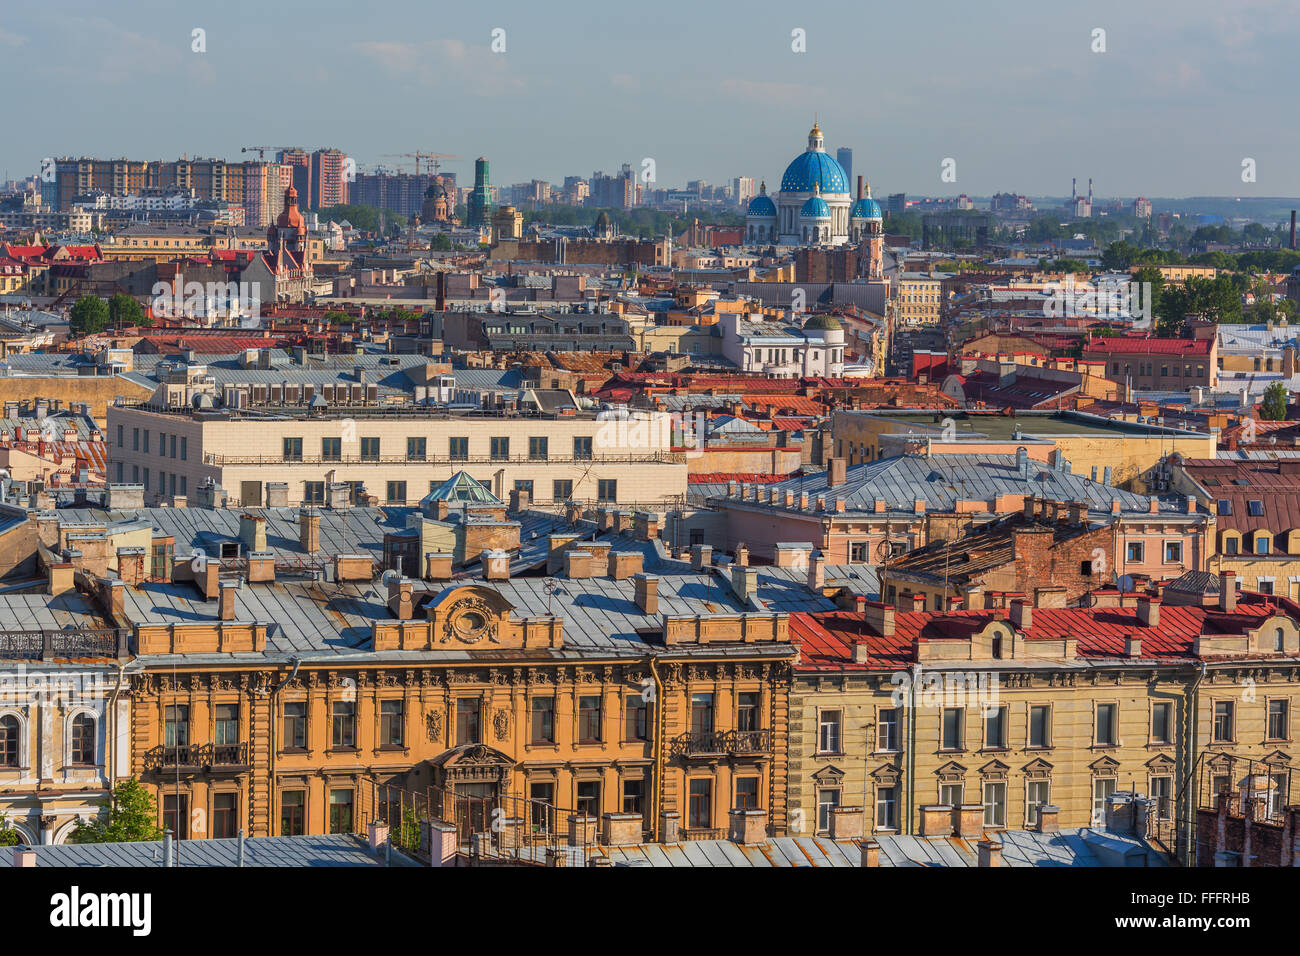 View from the Colonnade of St. Isaac's Cathedral, Saint Petersburg, Russia Stock Photo